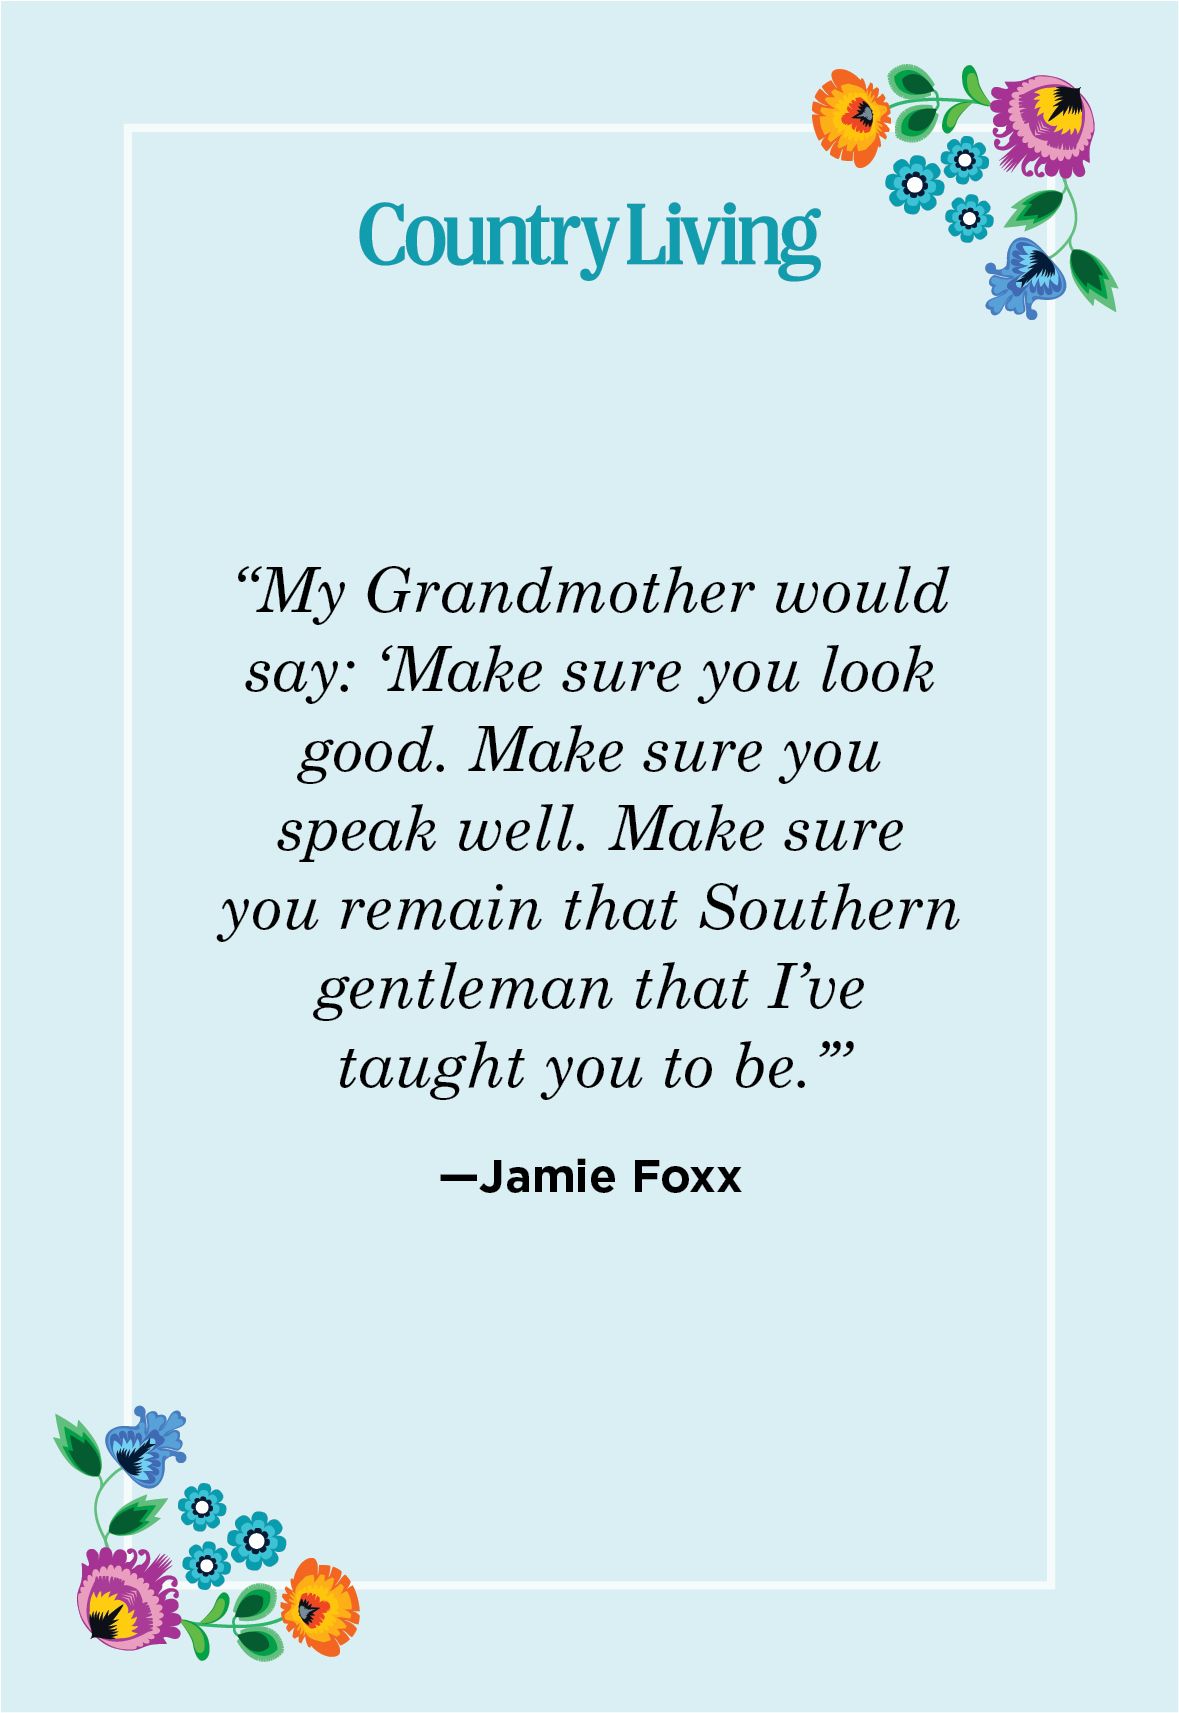 37 Grandma Love Quotes - Best Grandmother Quotes And Sayings